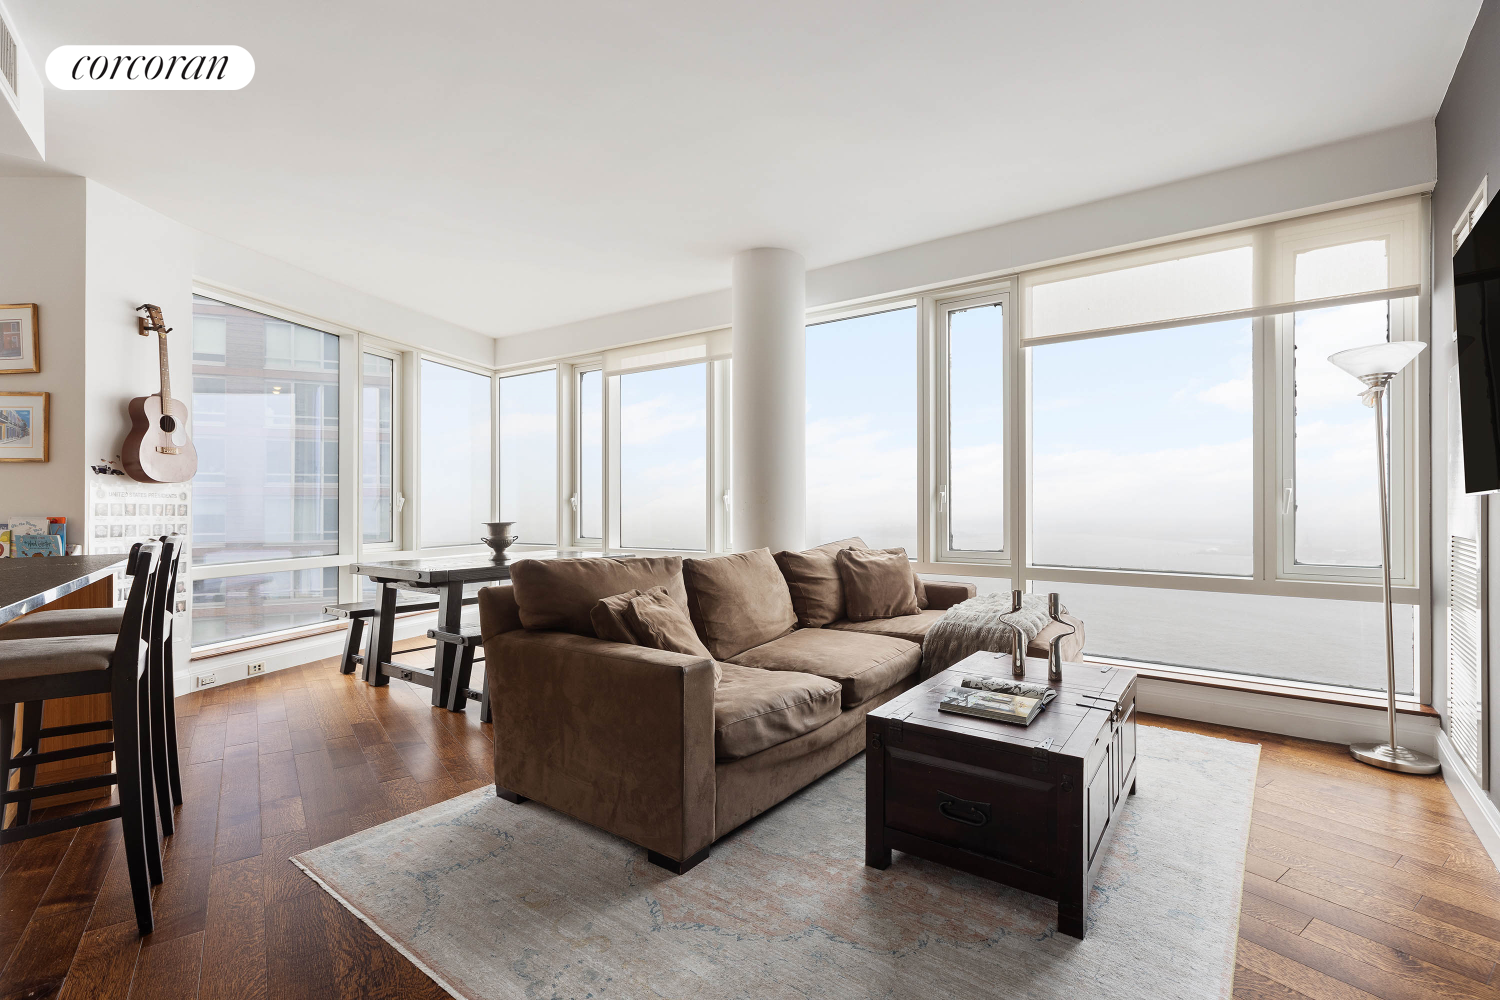 70 Little West Street 28D, Battery Park City, Downtown, NYC - 3 Bedrooms  
3 Bathrooms  
8 Rooms - 